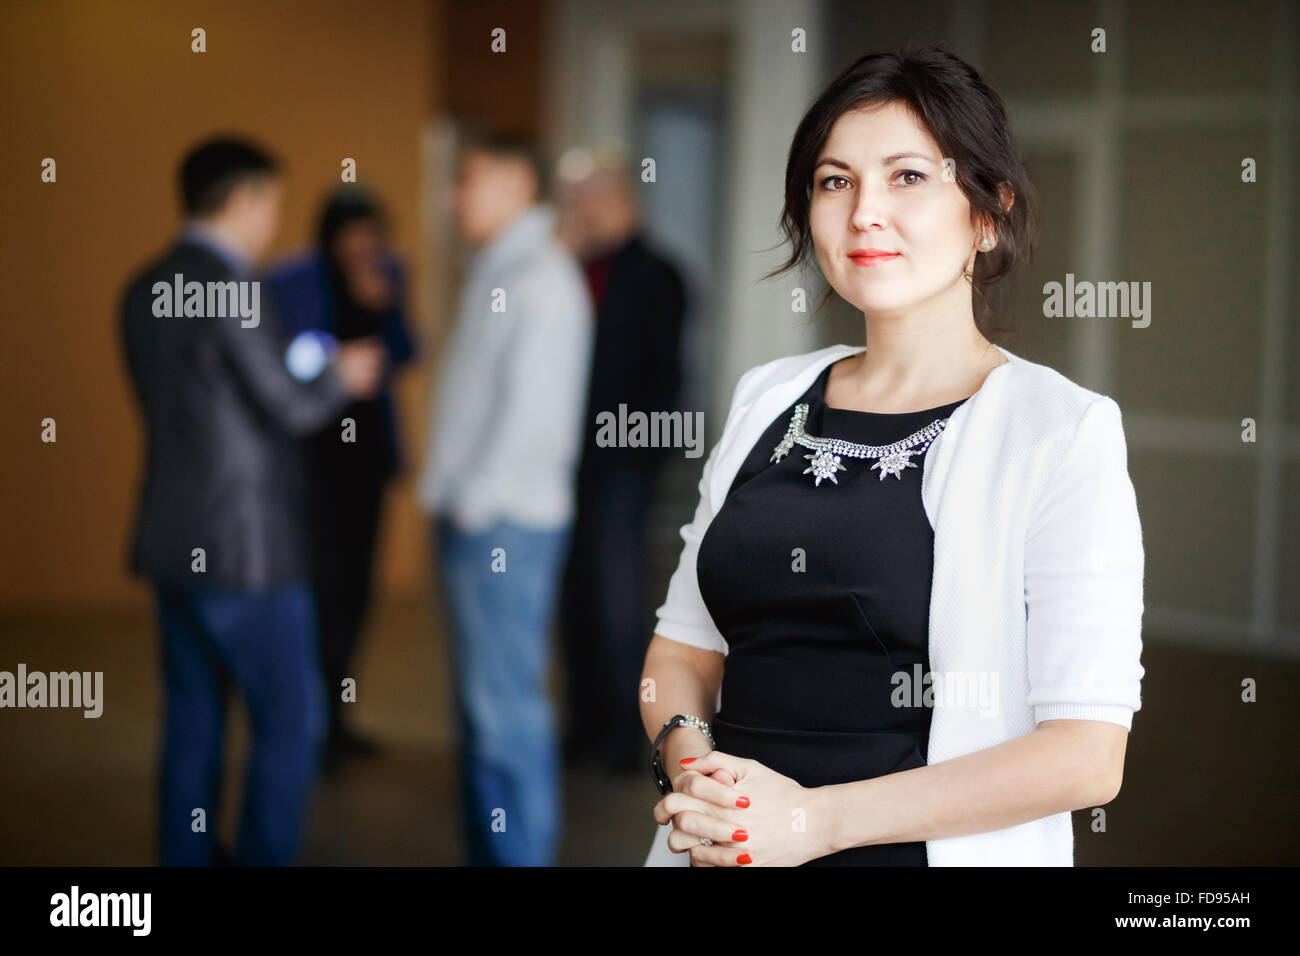 Successful attractive business woman boss brunette with kind eyes stands inside office building and welcoming smile. Strict black dress jewelry. Cute young chief female posing. In background man discussing. Stock Photo